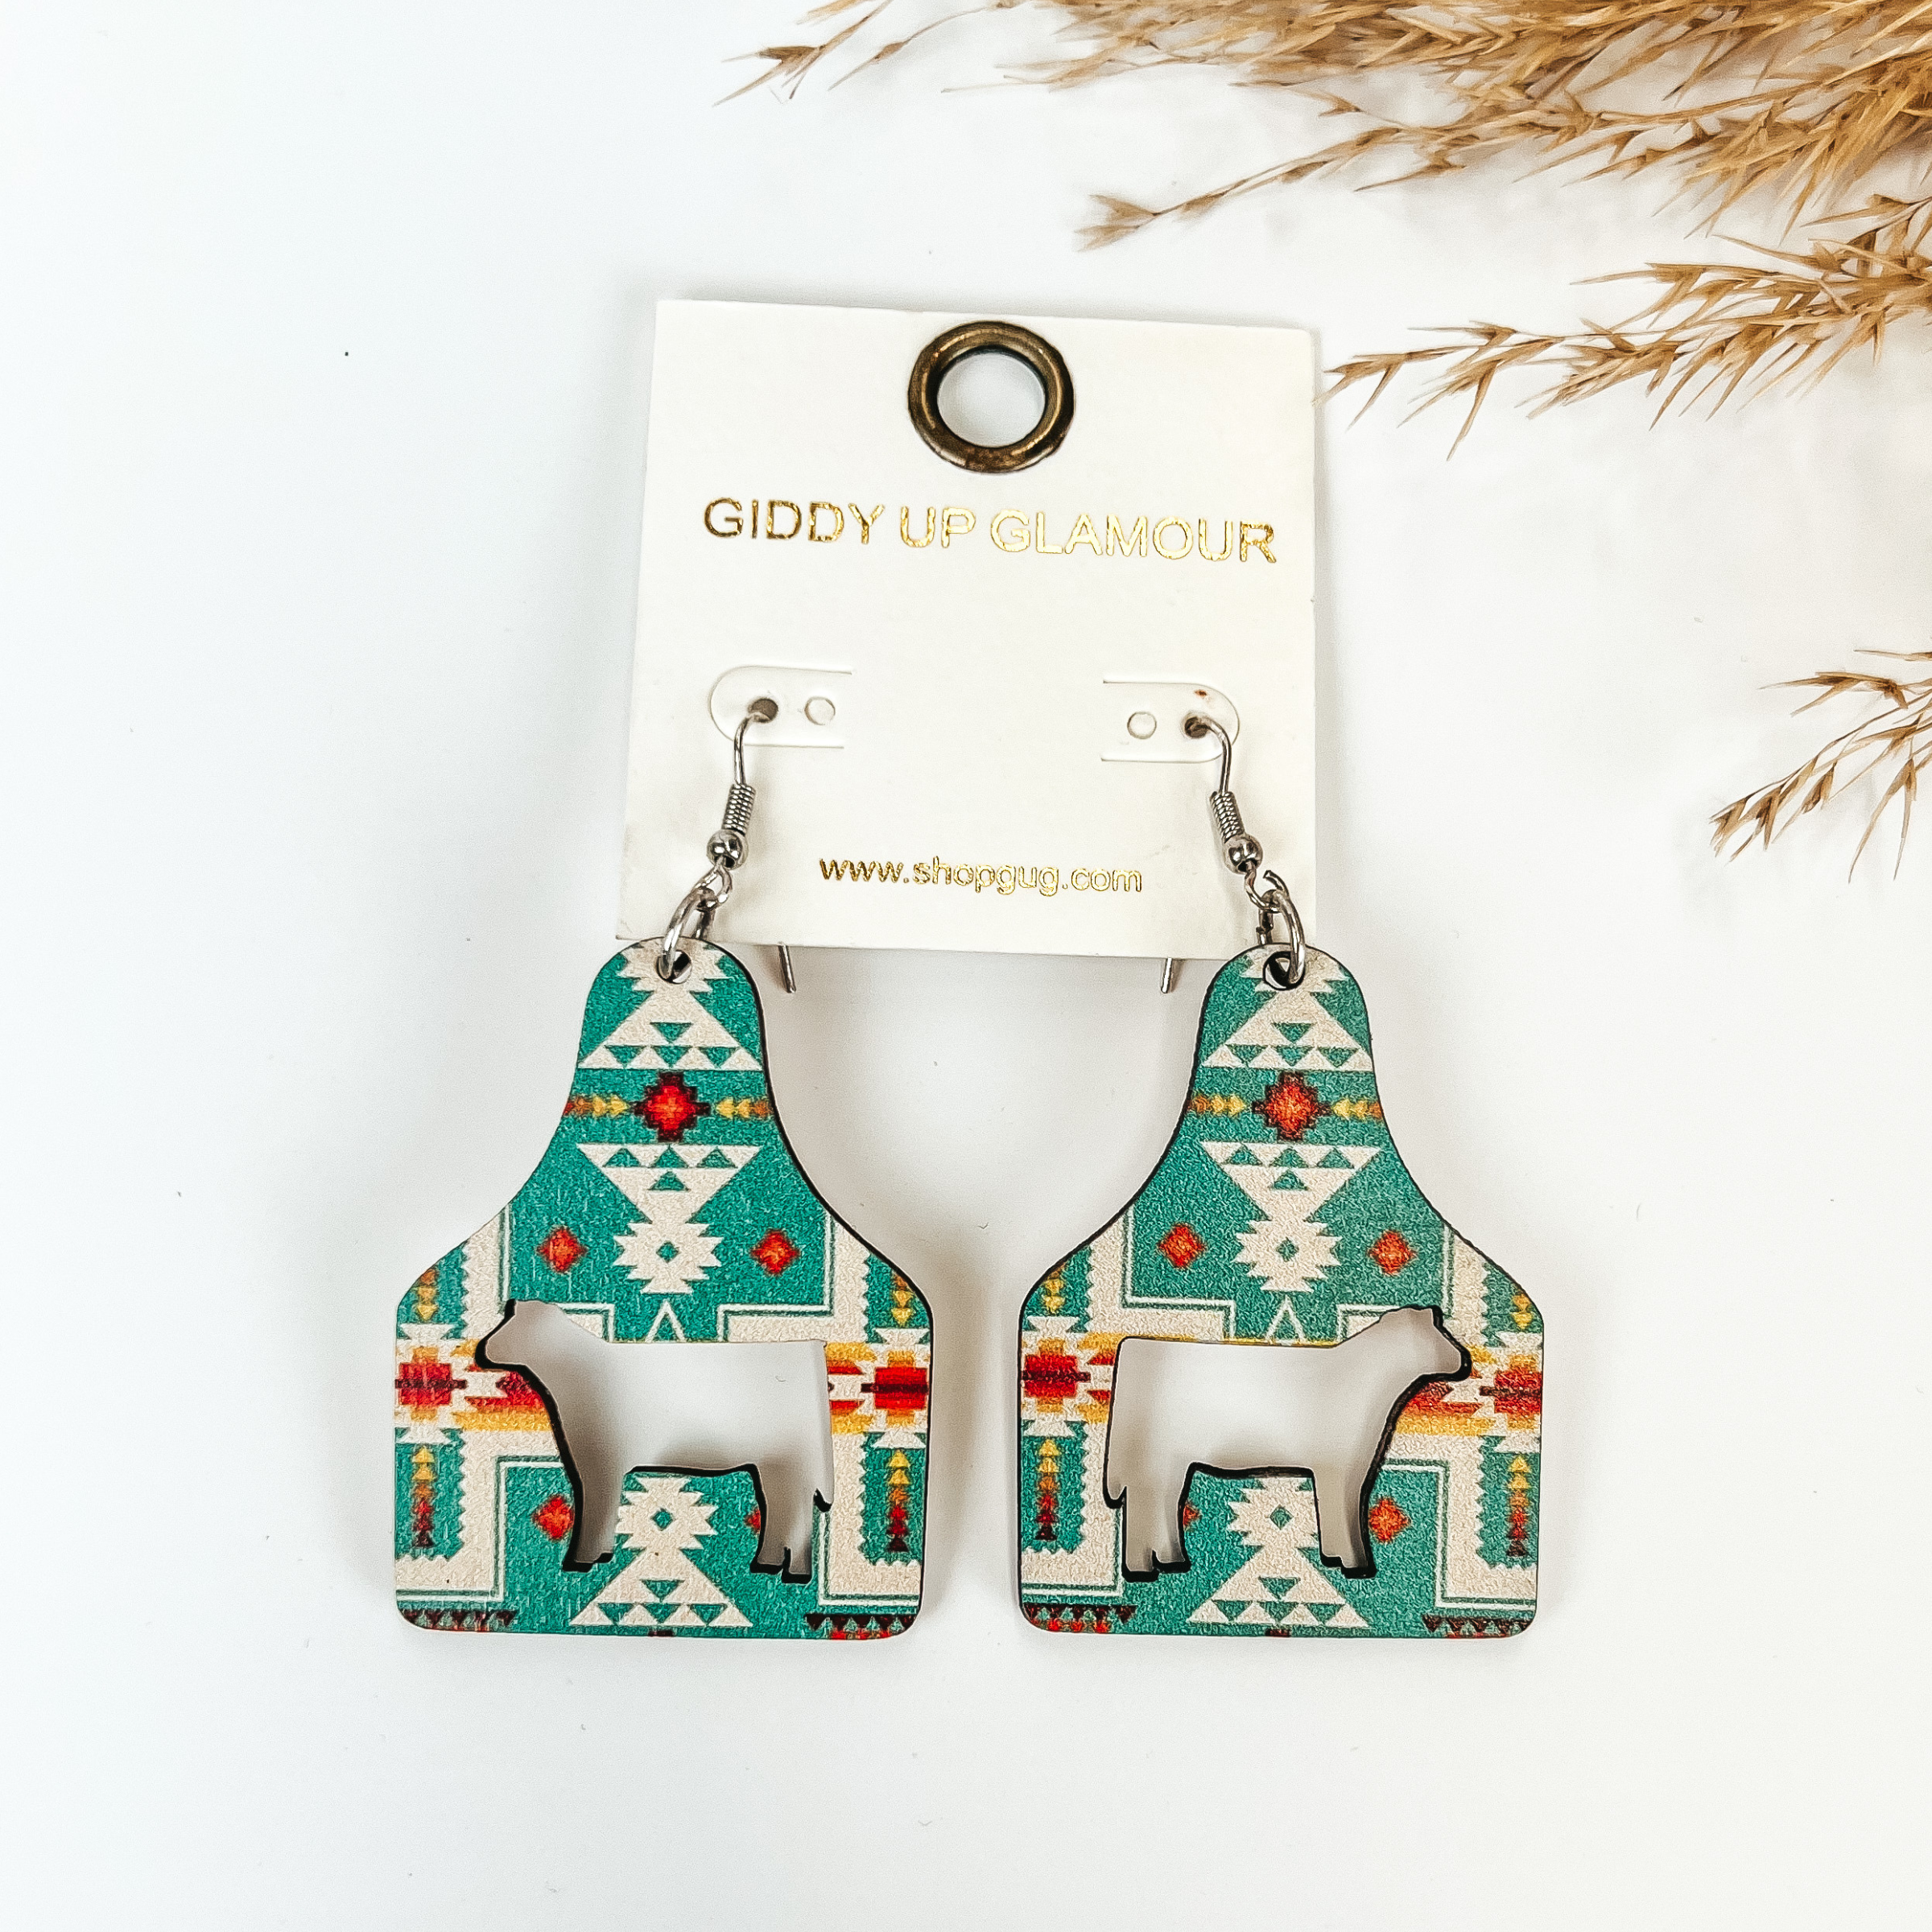 Cattle tag drop earrings with a turquoise aztec print. In the center of the earrings is a cutout of a cow. These earrings are pictured on a white background with tan pompous grass in the top left corner. 